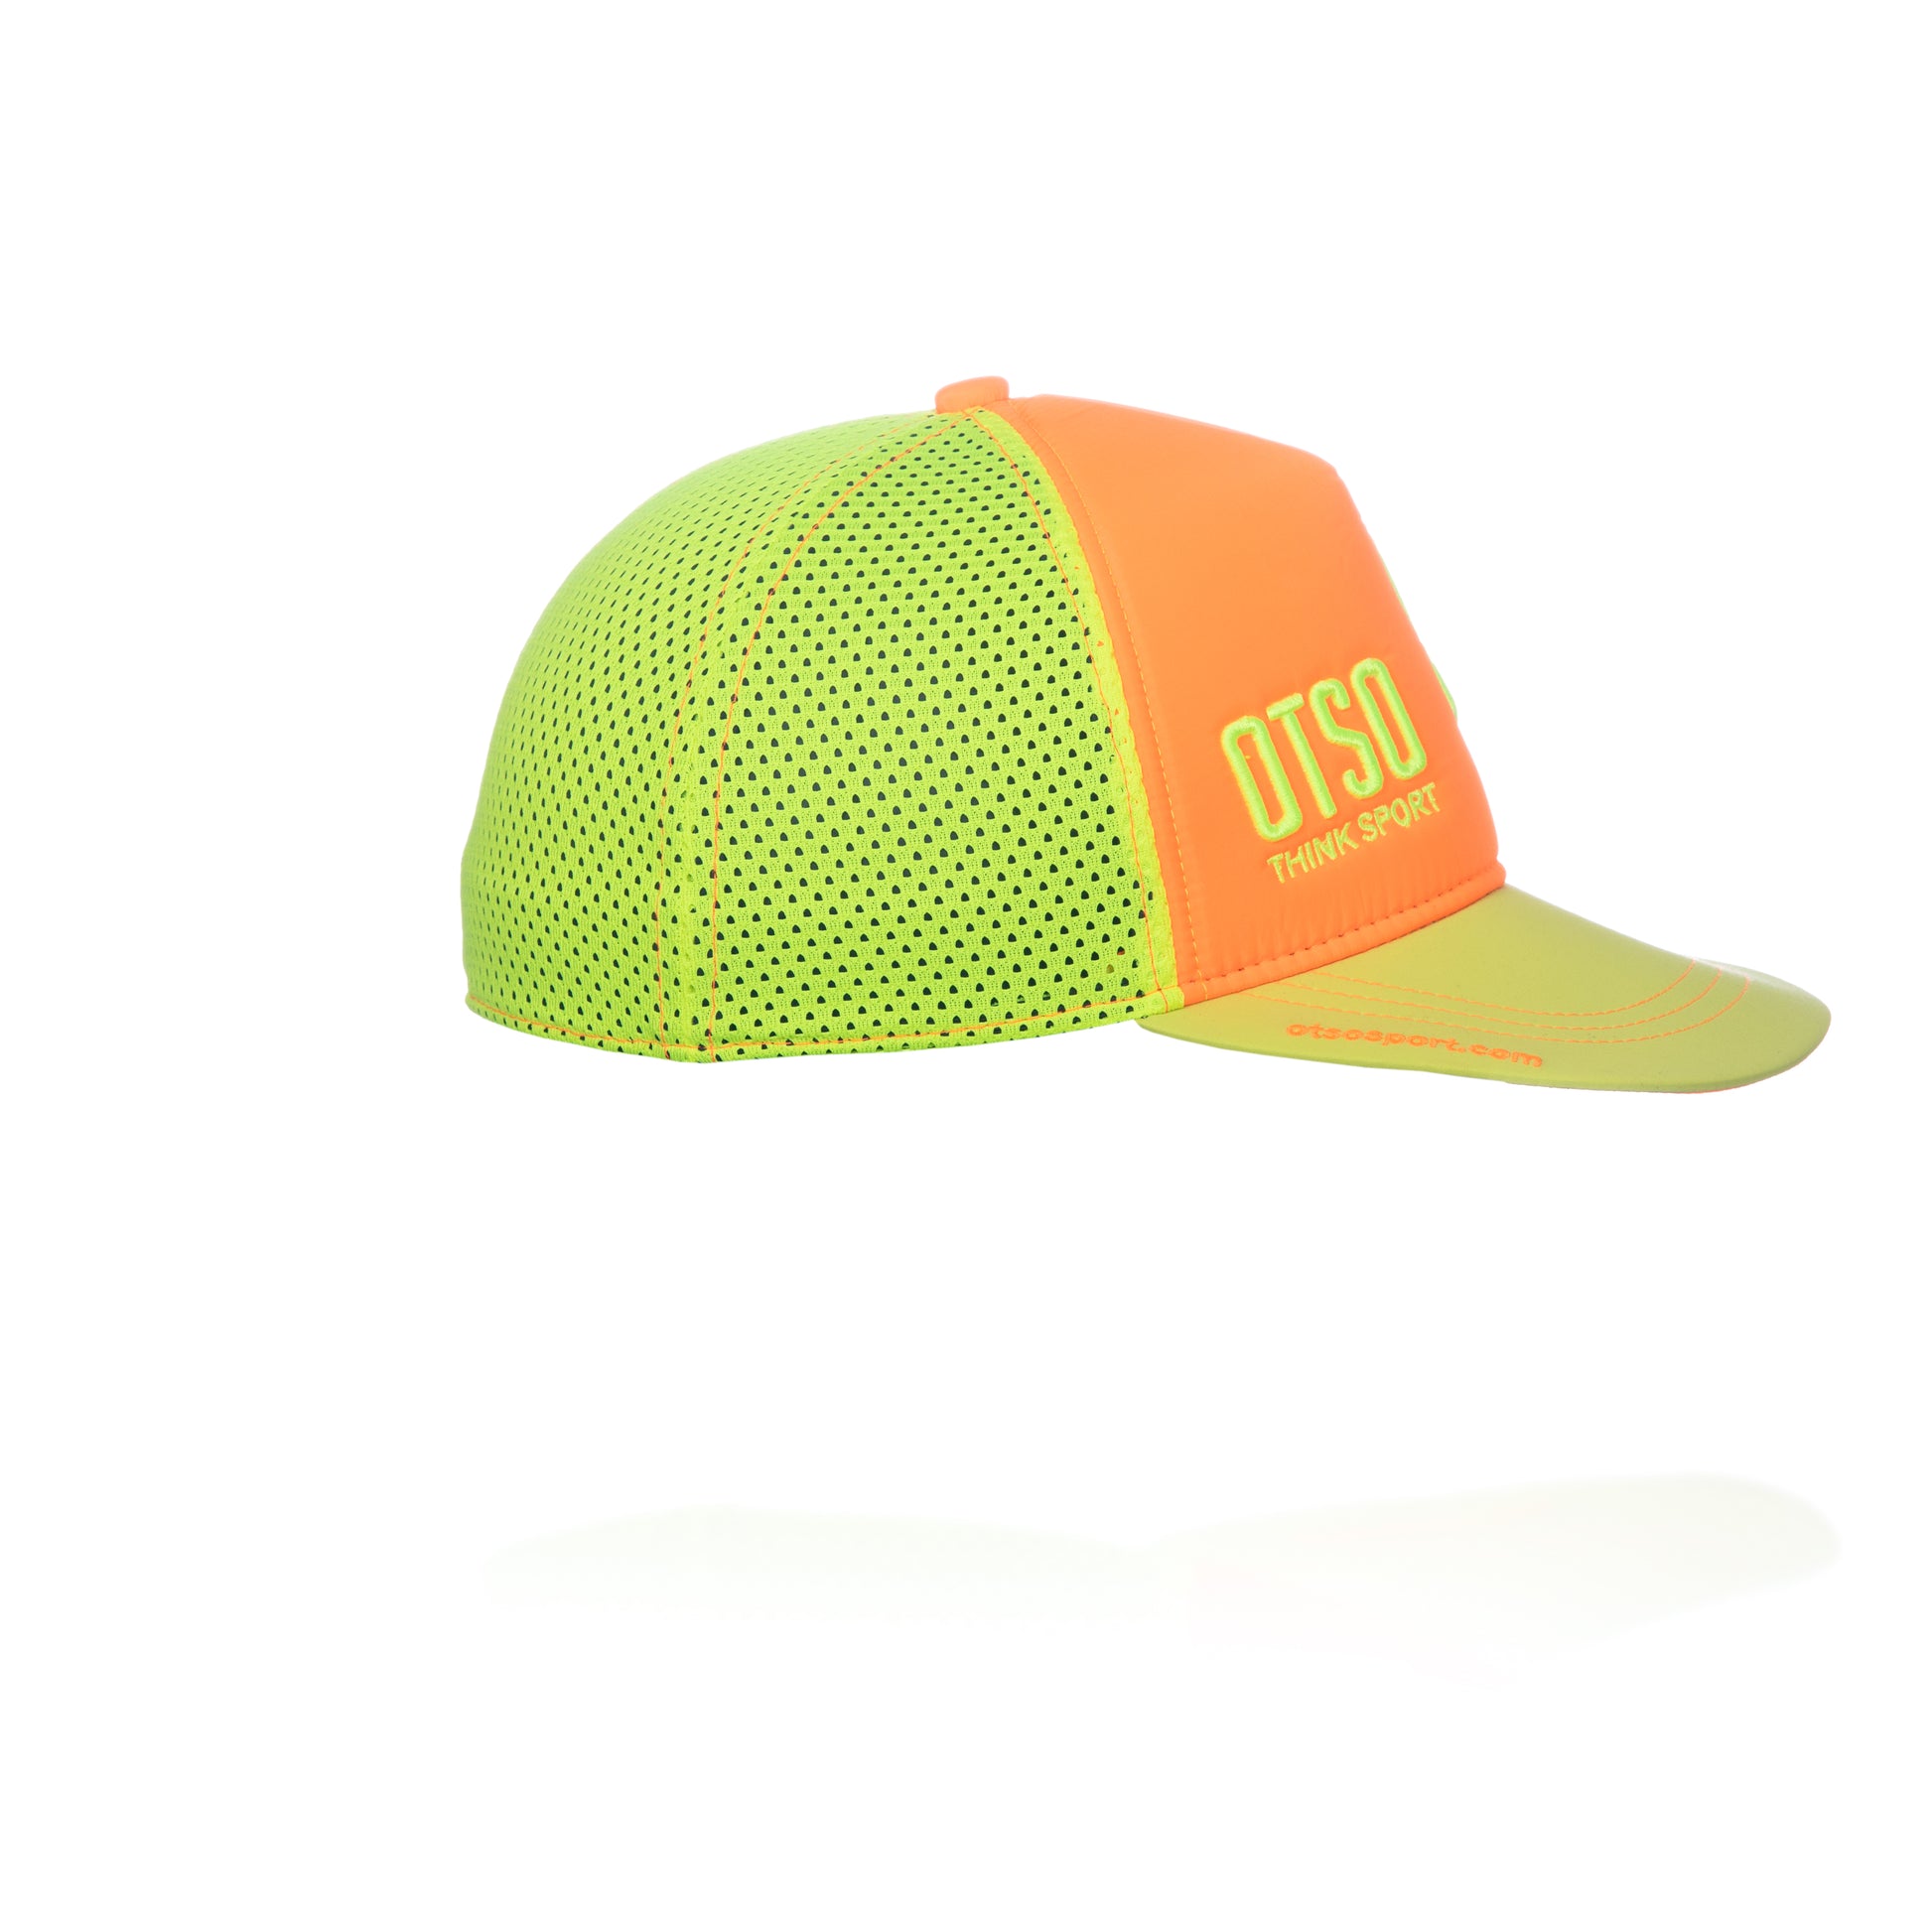 Casquette 6 pans fluo Safety - MB Goodies